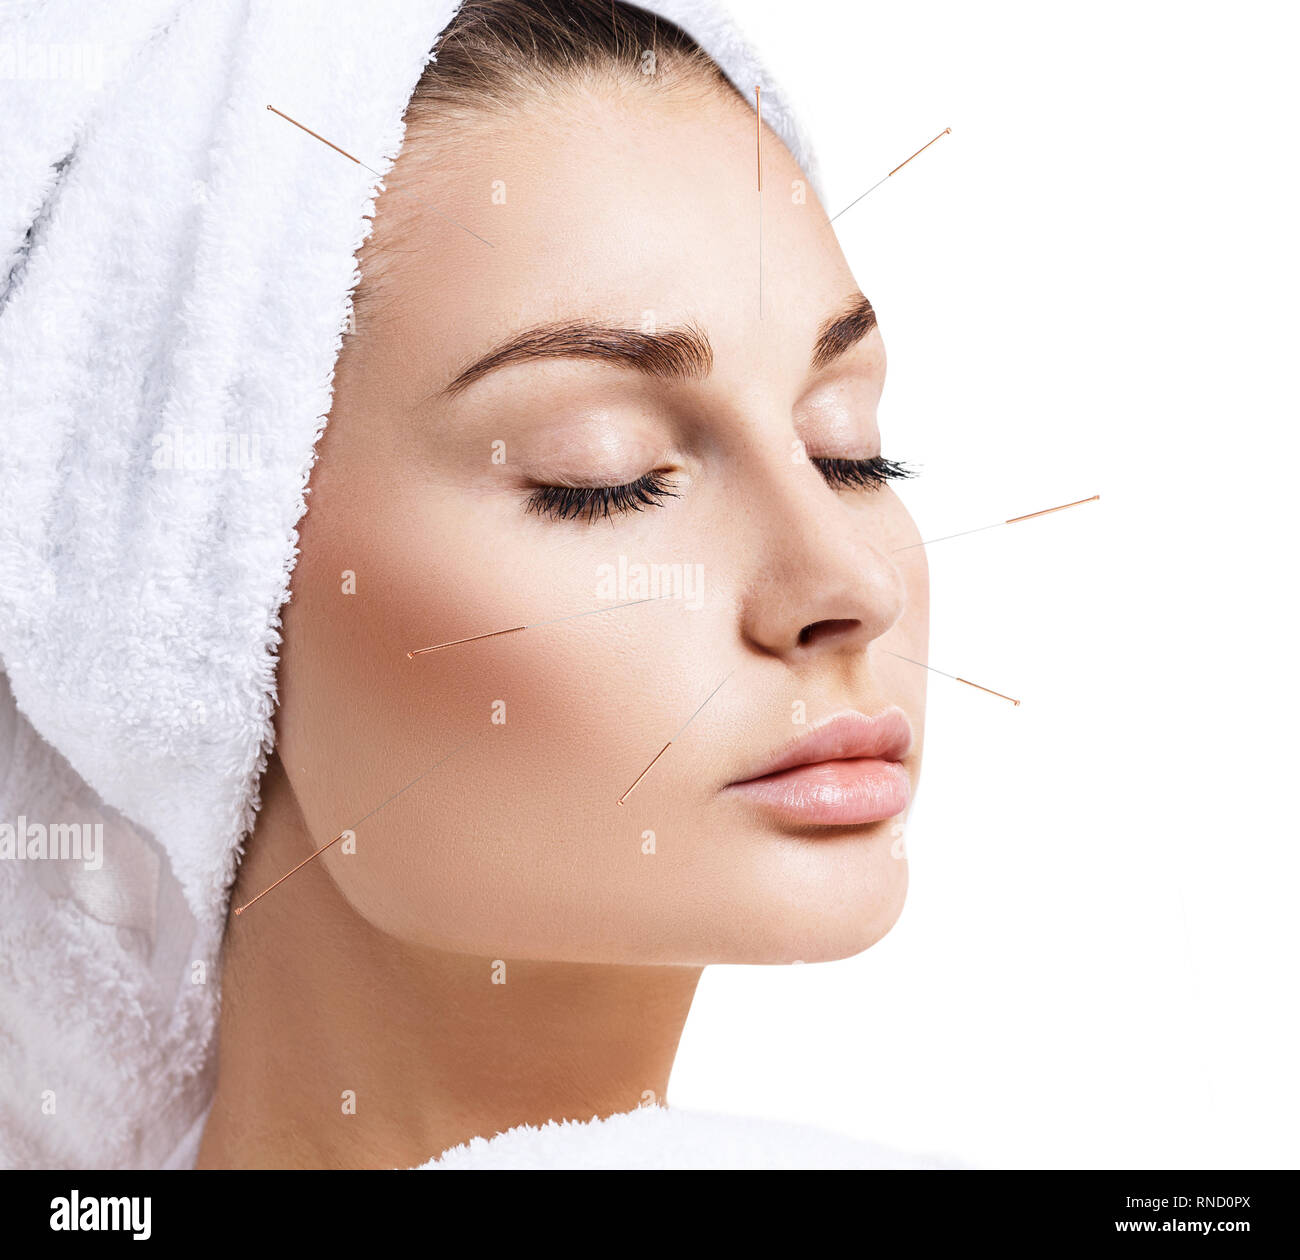 Woman undergoing acupuncture treatment. Stock Photo